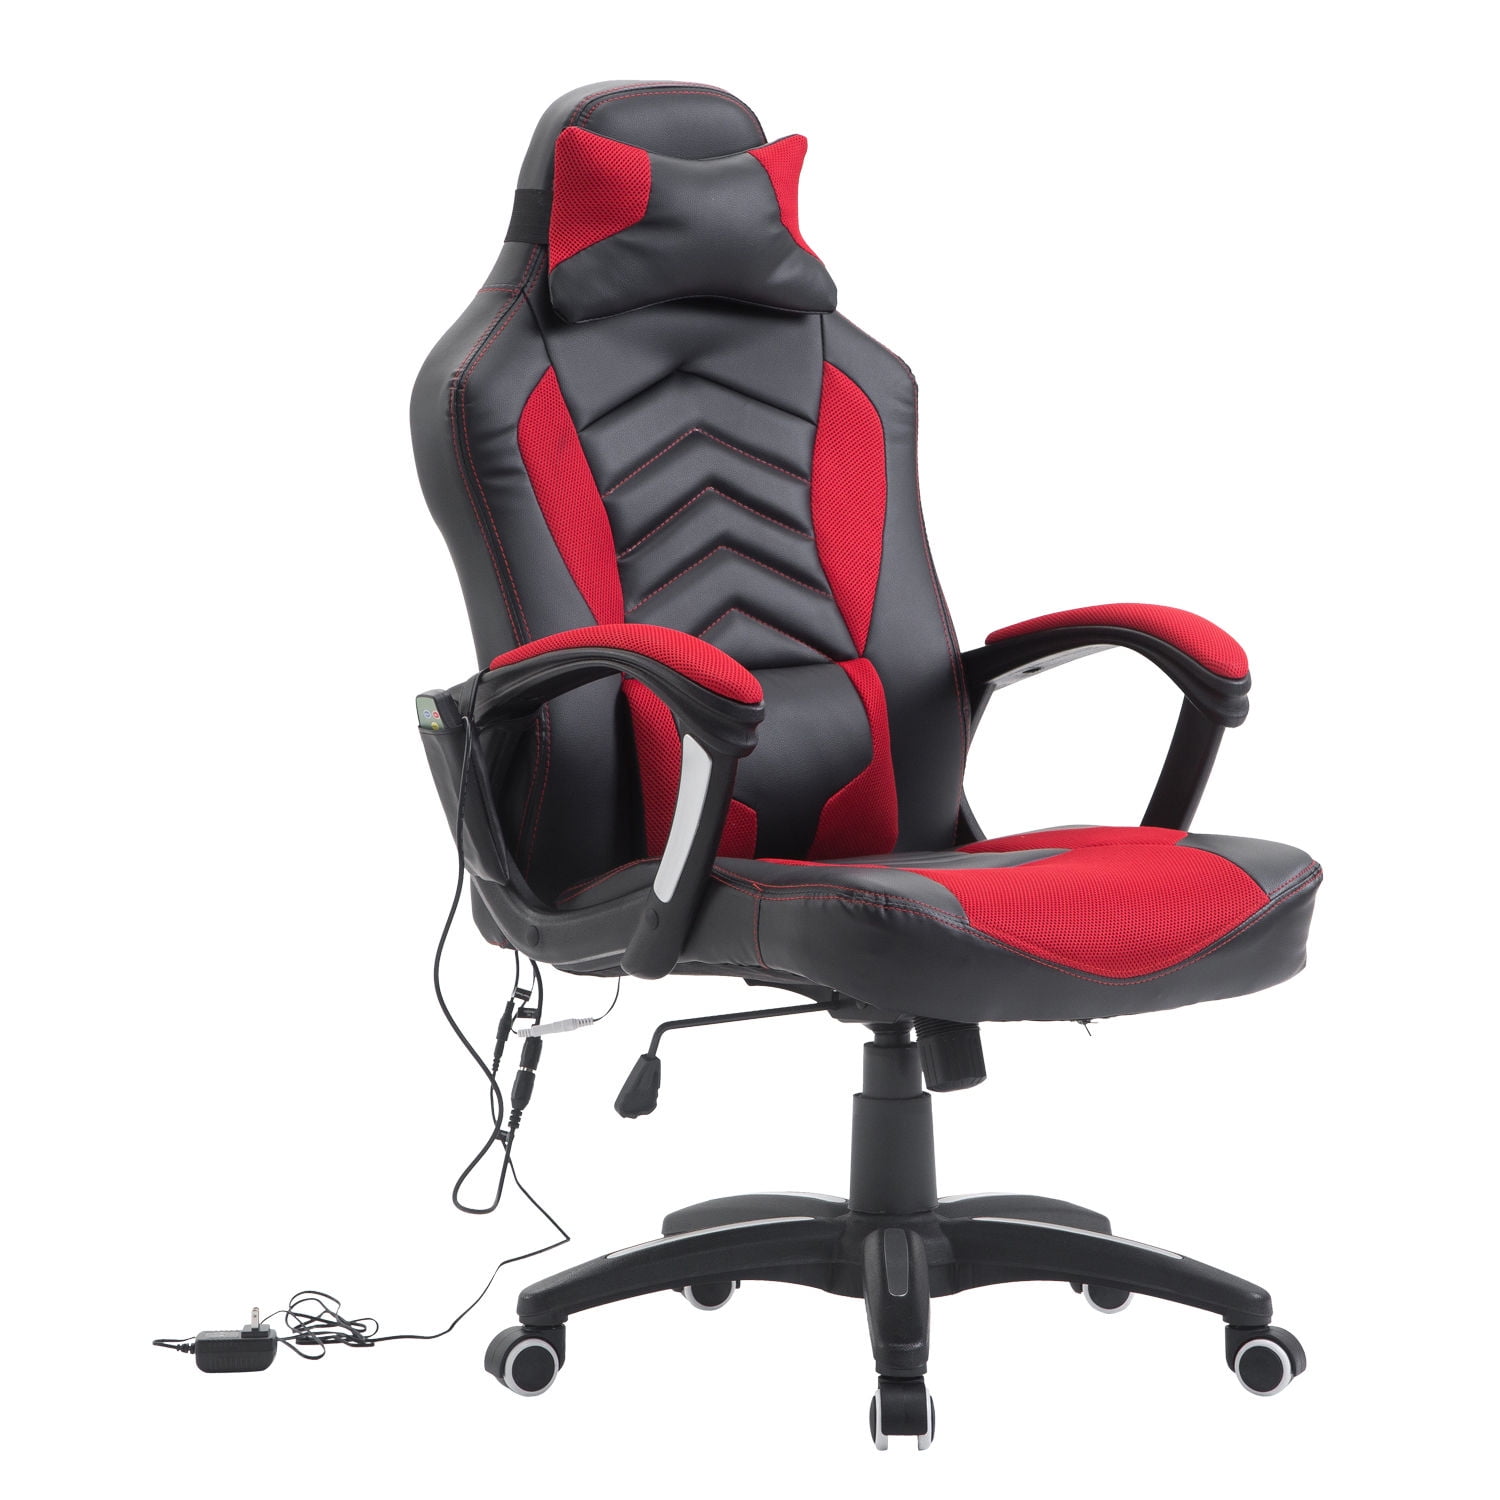 Racing Car Office Chair Heated Vibrating Executive Ergonomic Computer Chair Red 